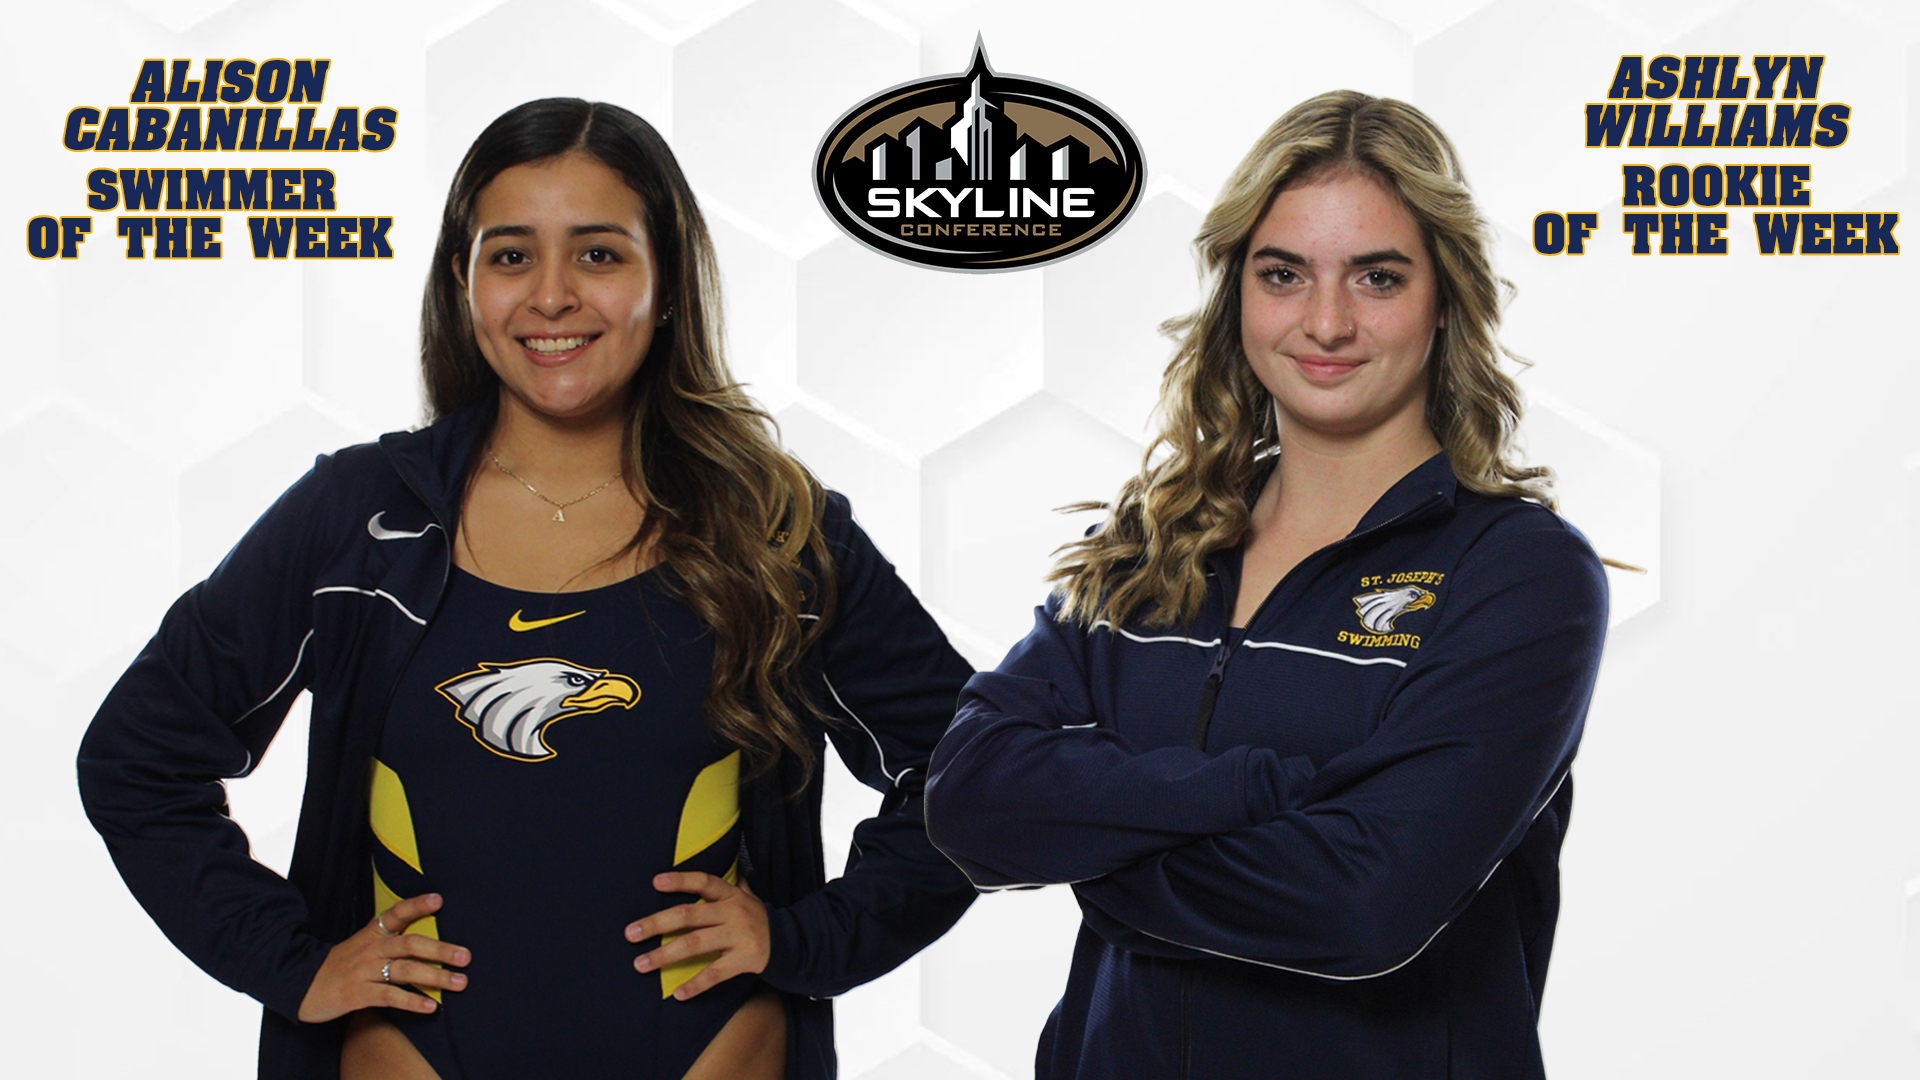 Cabanillas and Williams Receive Skyline Conference Honors